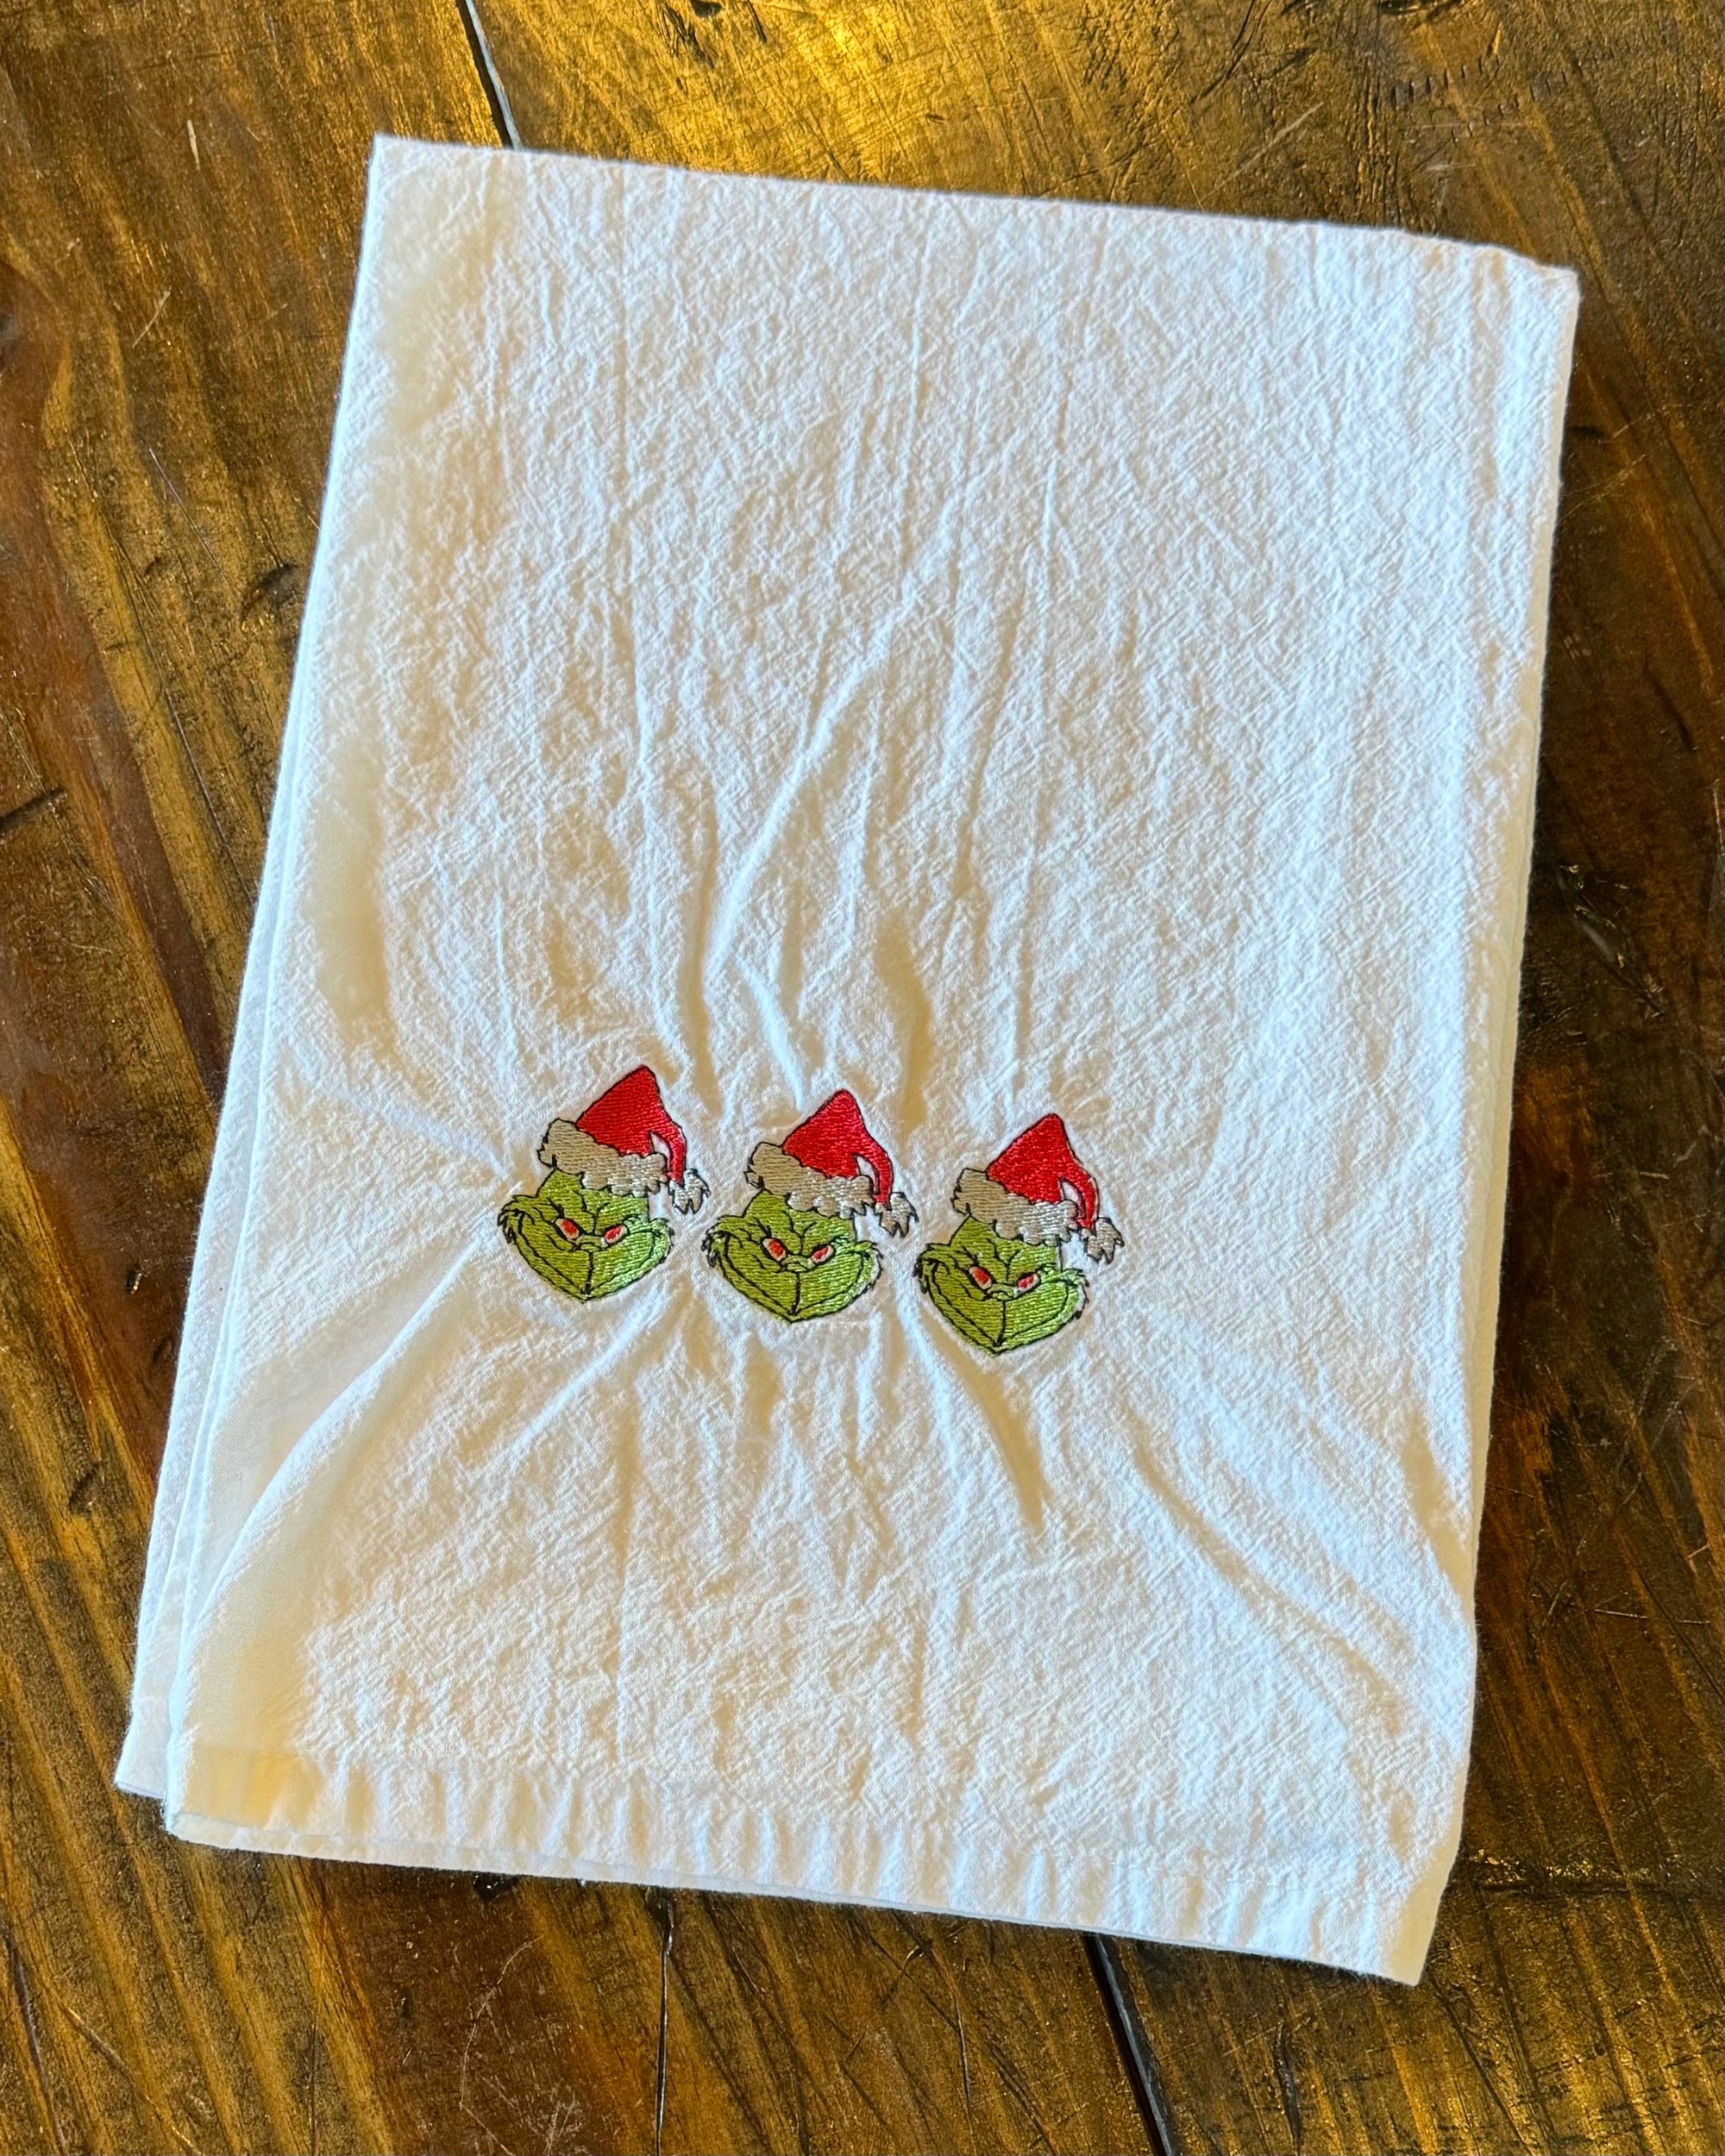 Tea Towel Embroidery Project - Embroidered Dishtowels